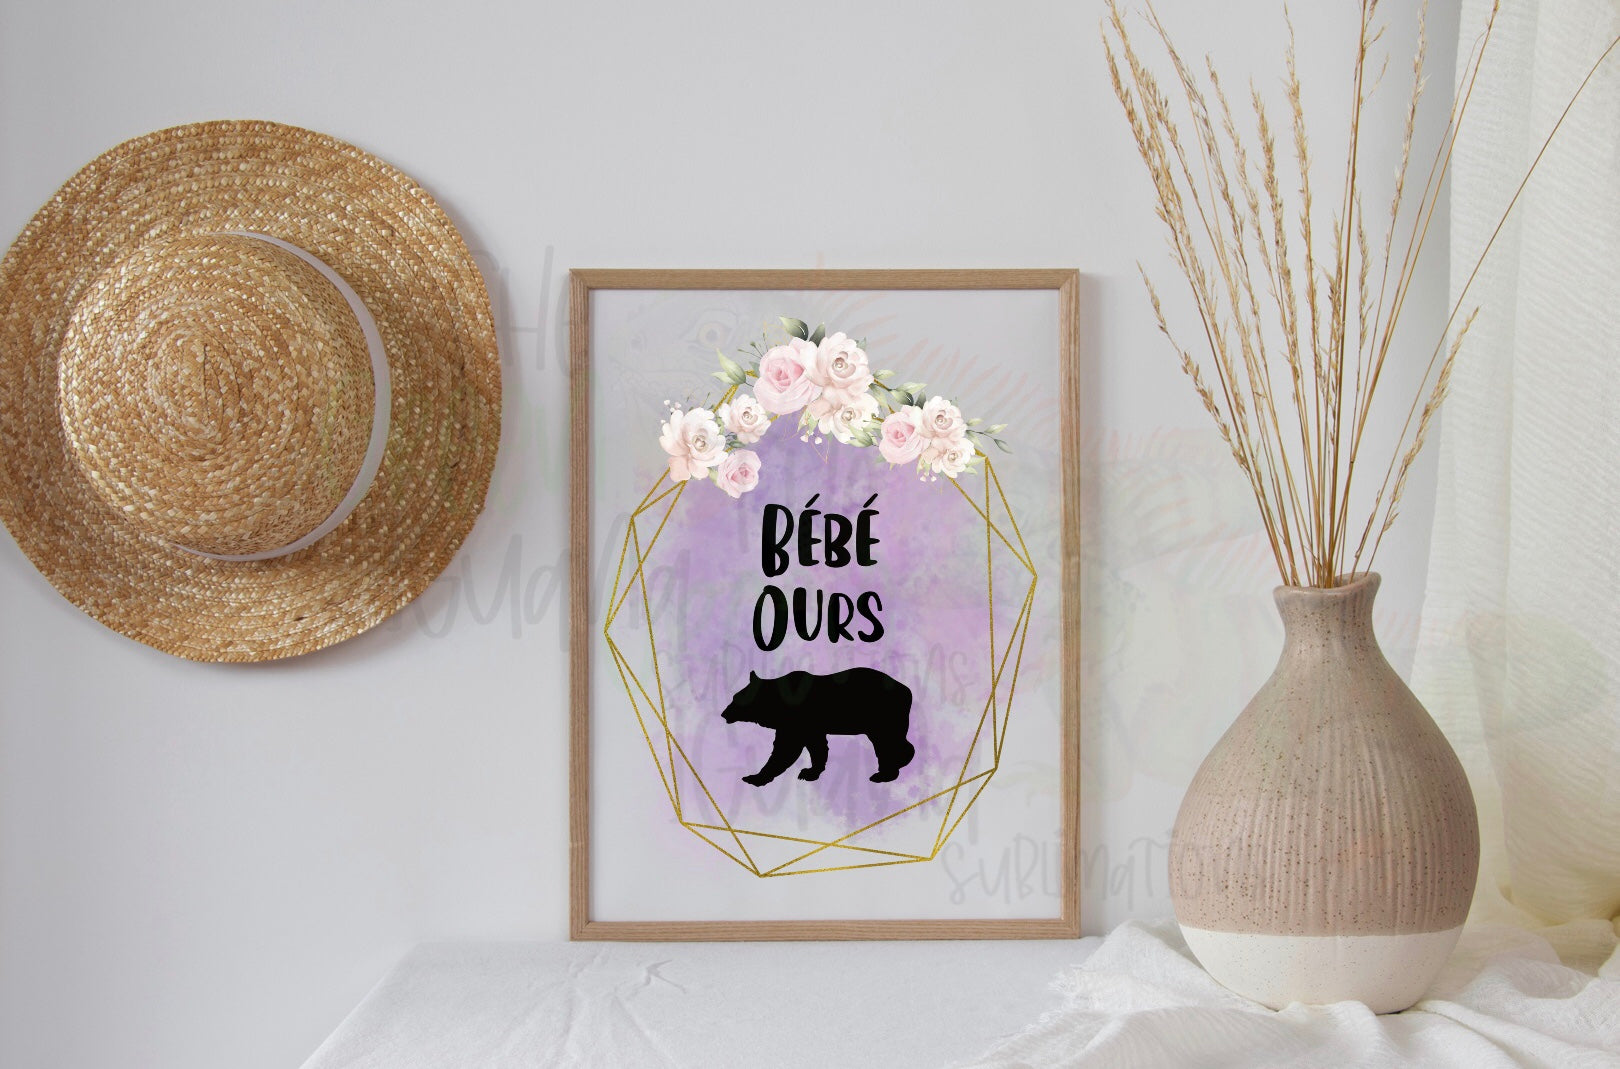 Bébé Ours (Baby Bear French) DIGITAL